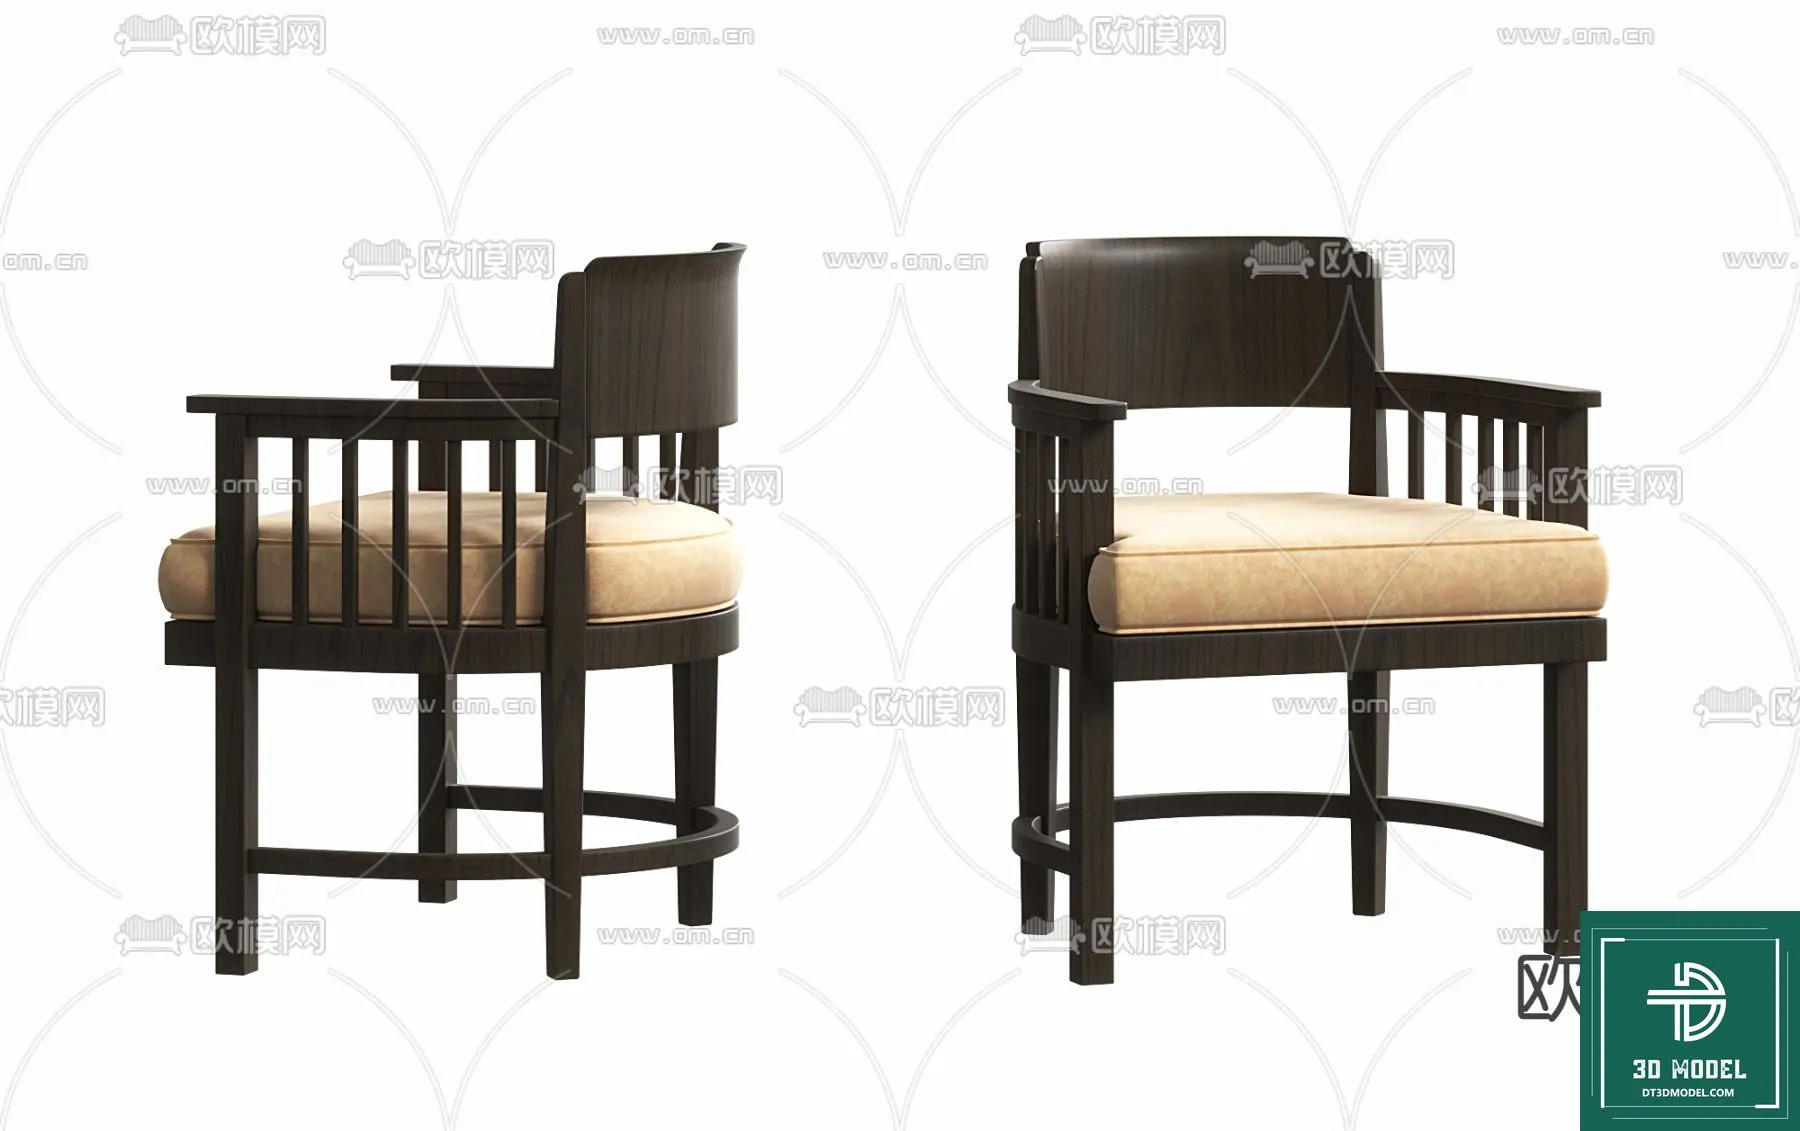 INDOCHINE STYLE – 3D MODELS – 774